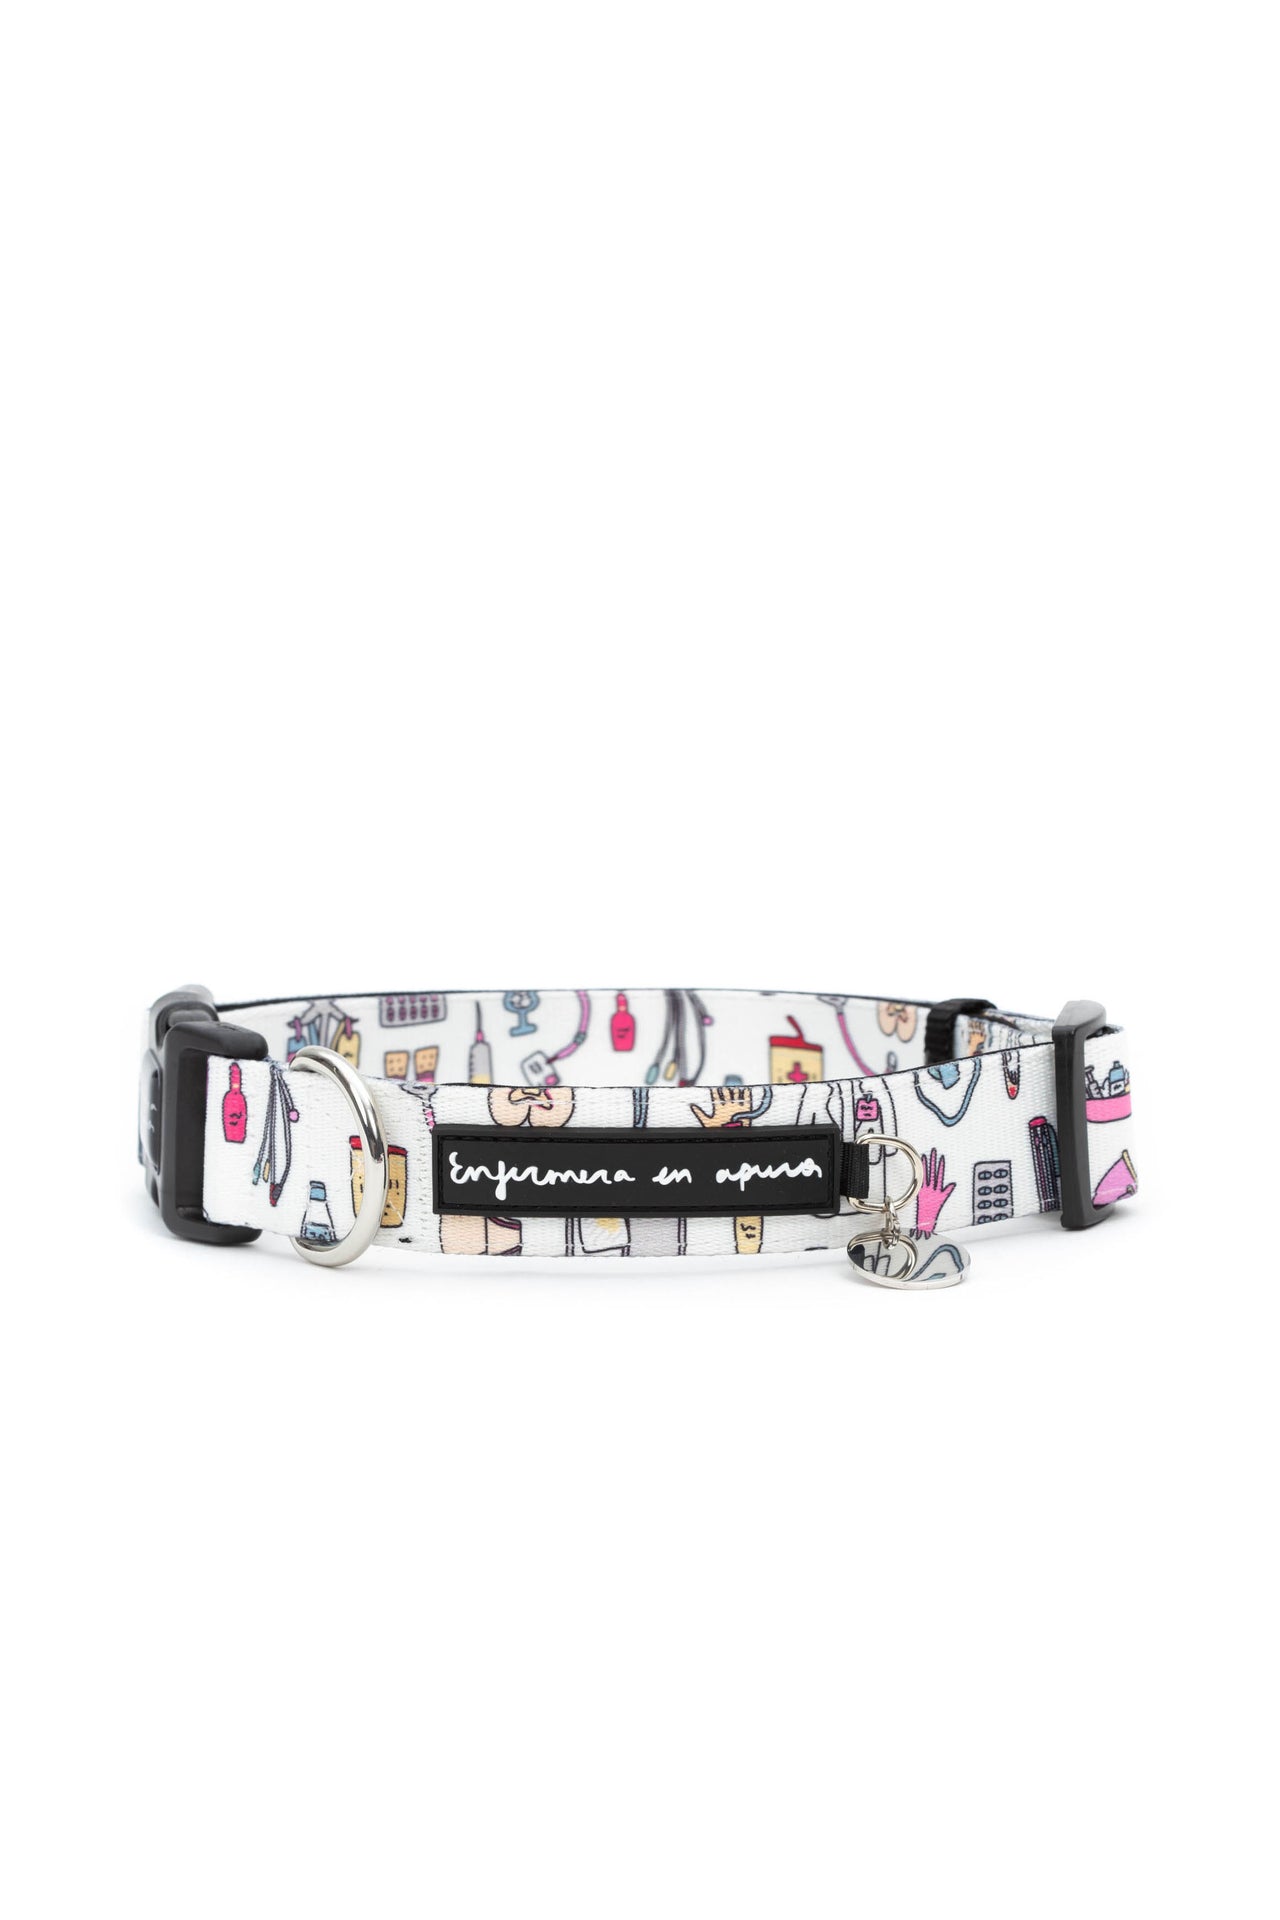 DOG AND CAT COLLAR "NURSES THINGS" - L